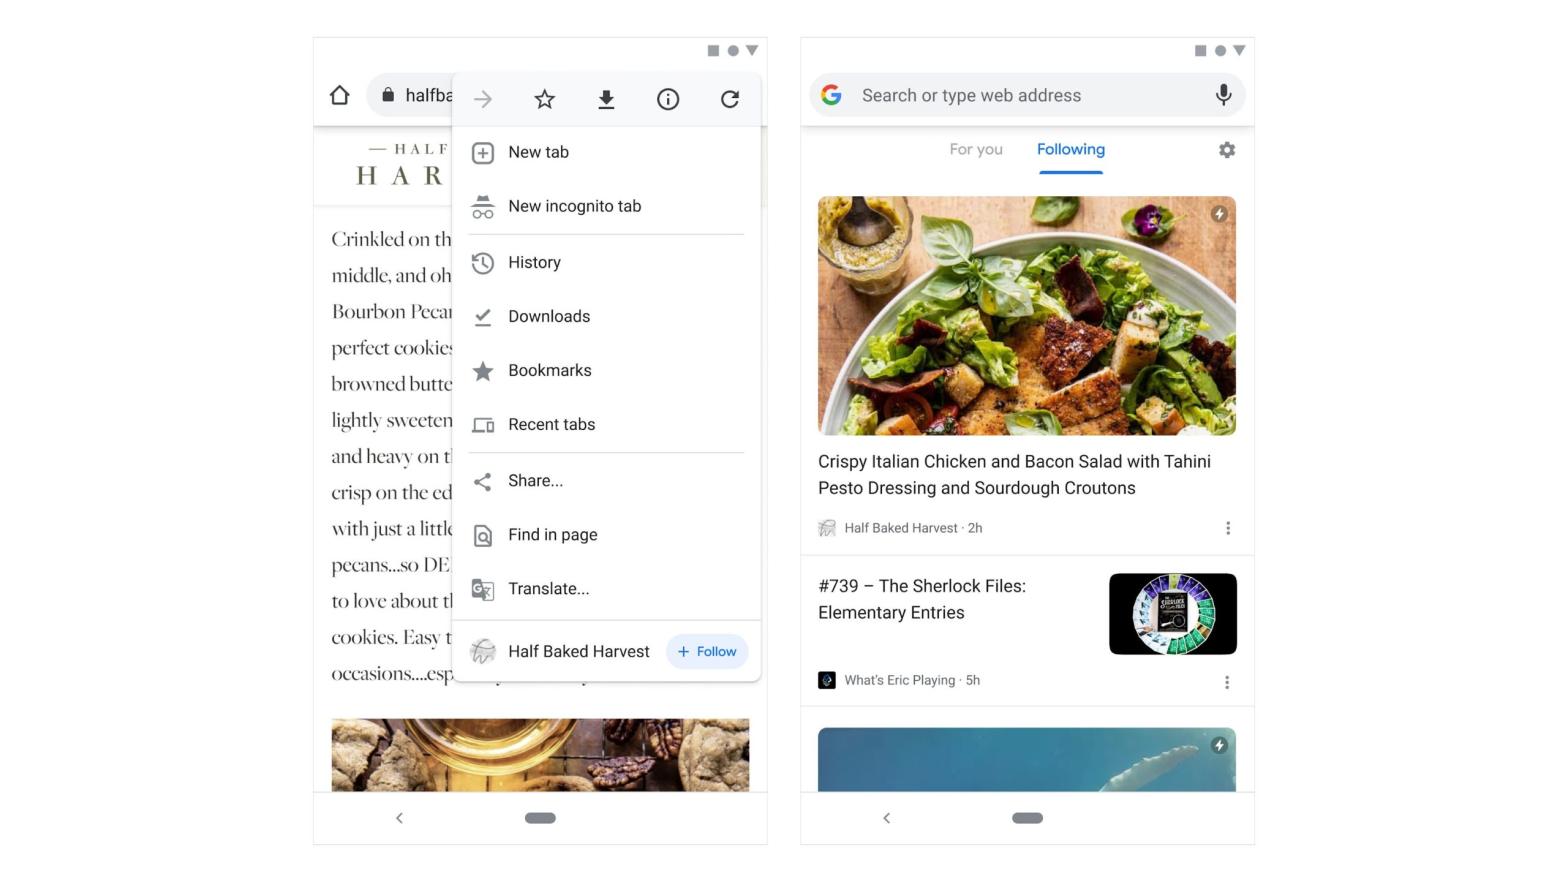 Google's screenshots point to a very Google Reader-like interface existing inside Chrome. But again, this is not Google Reader. (Image: Google)